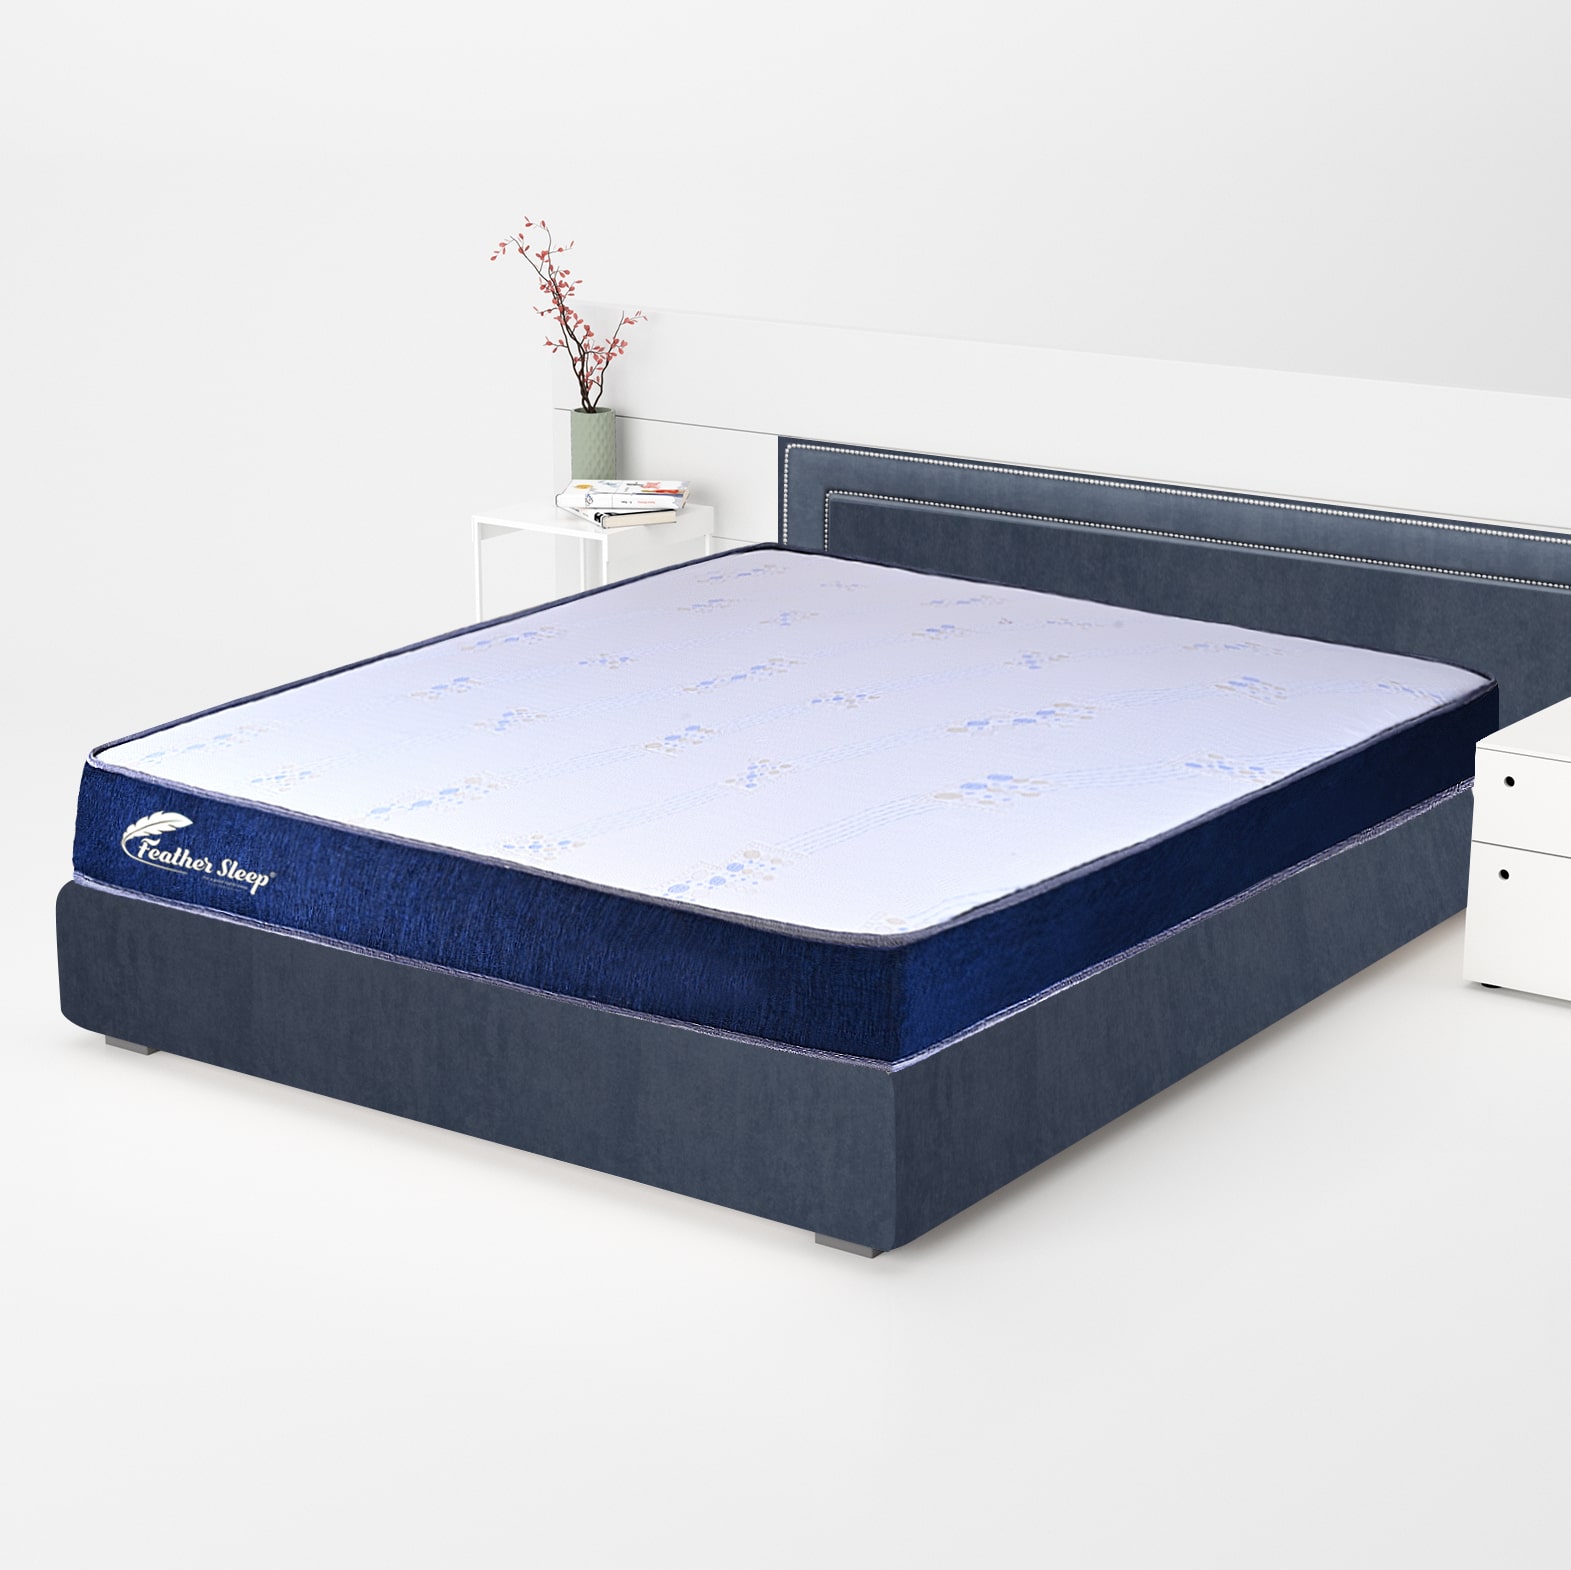 Feather sleep mattress 8 Years Warranty Orthopedic Mattress, 3 Layer ,Memory foam top High Resilience, Dual Sided High Density with Firm & Soft Sides